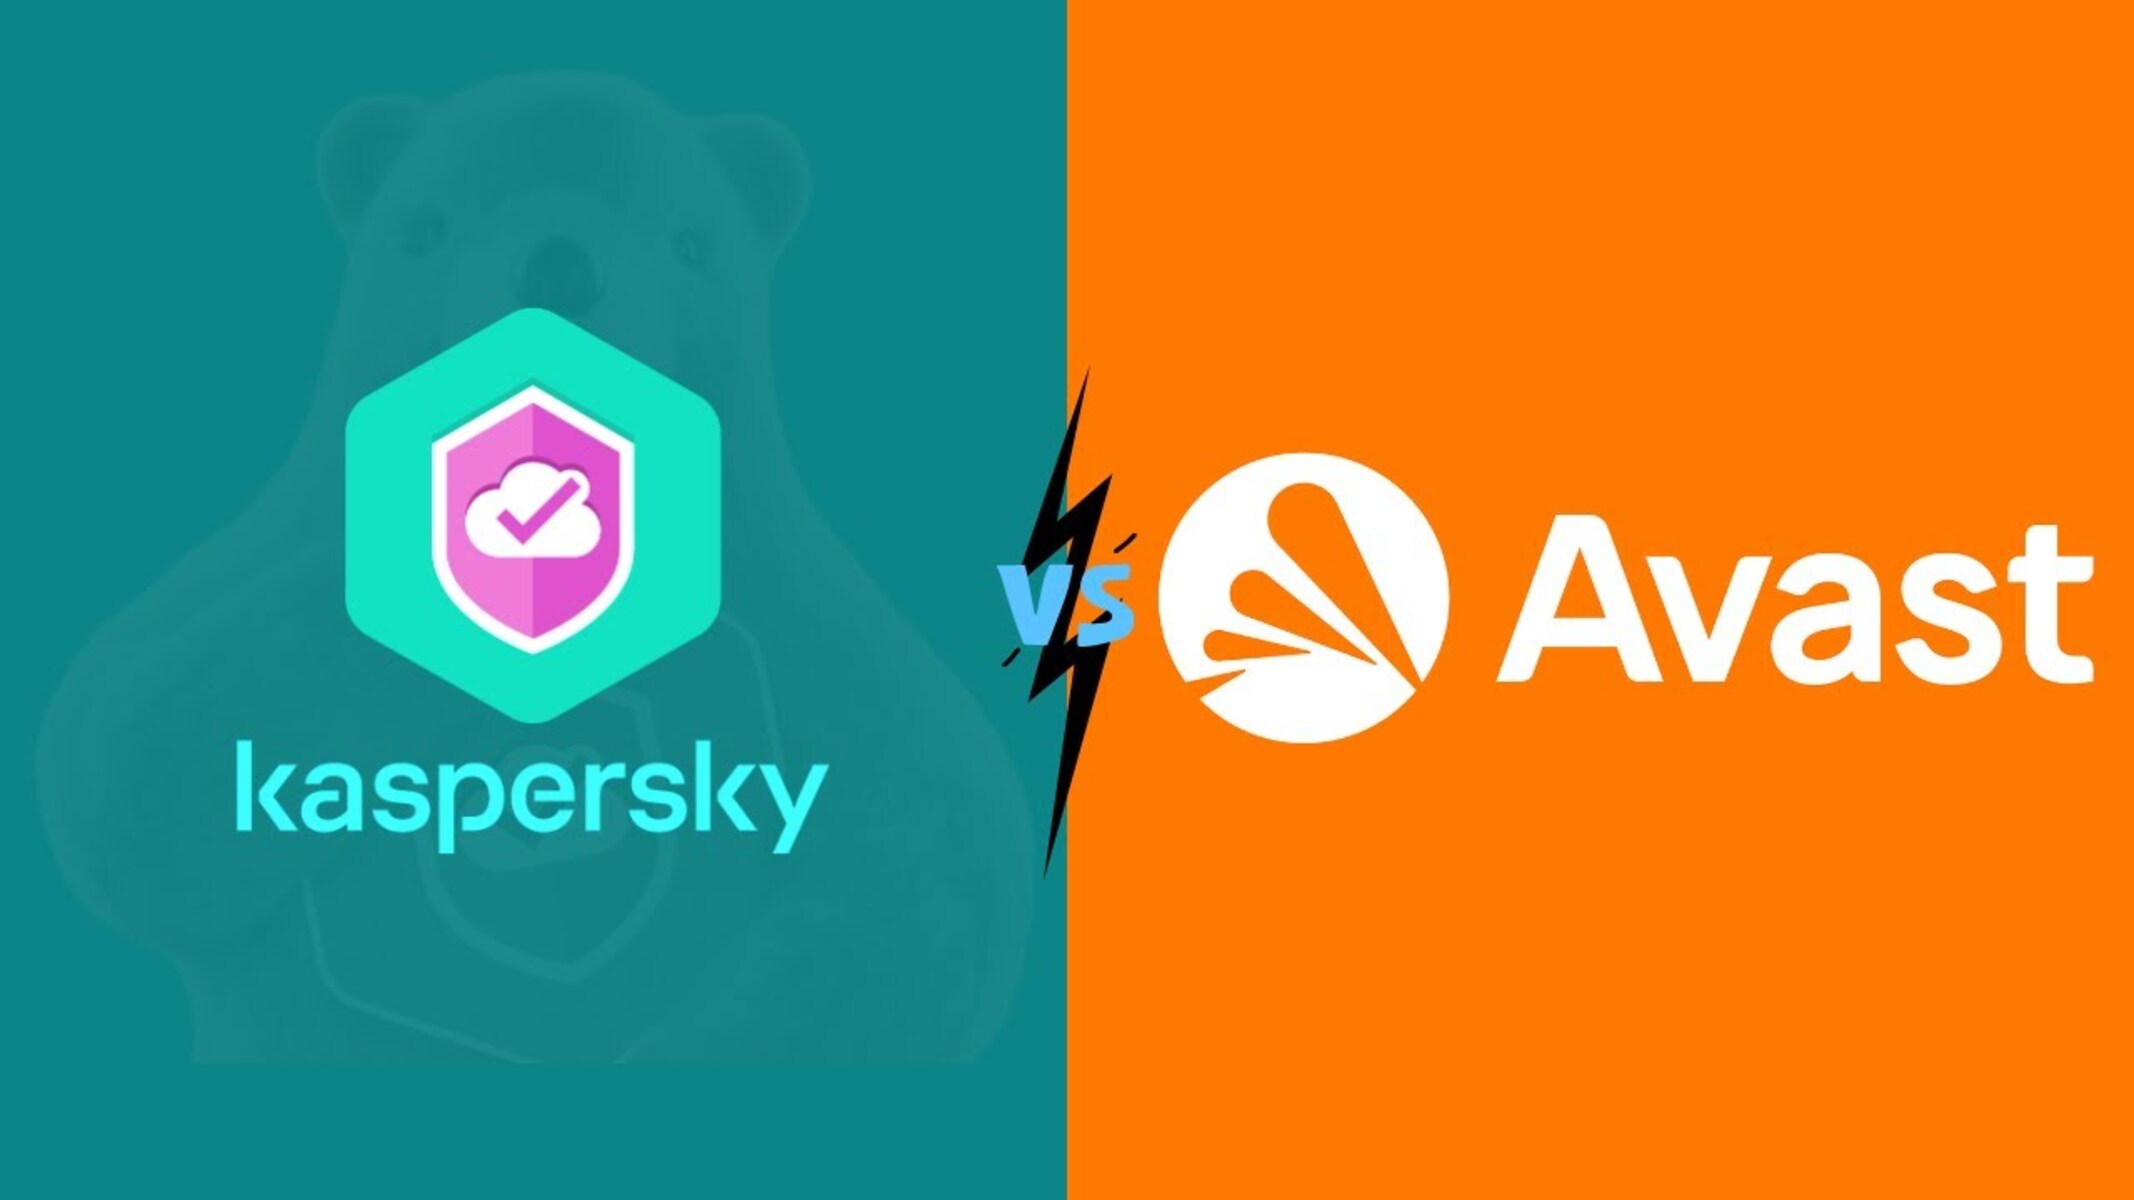 How Does Free Avast Compared To Kaspersky Internet Security